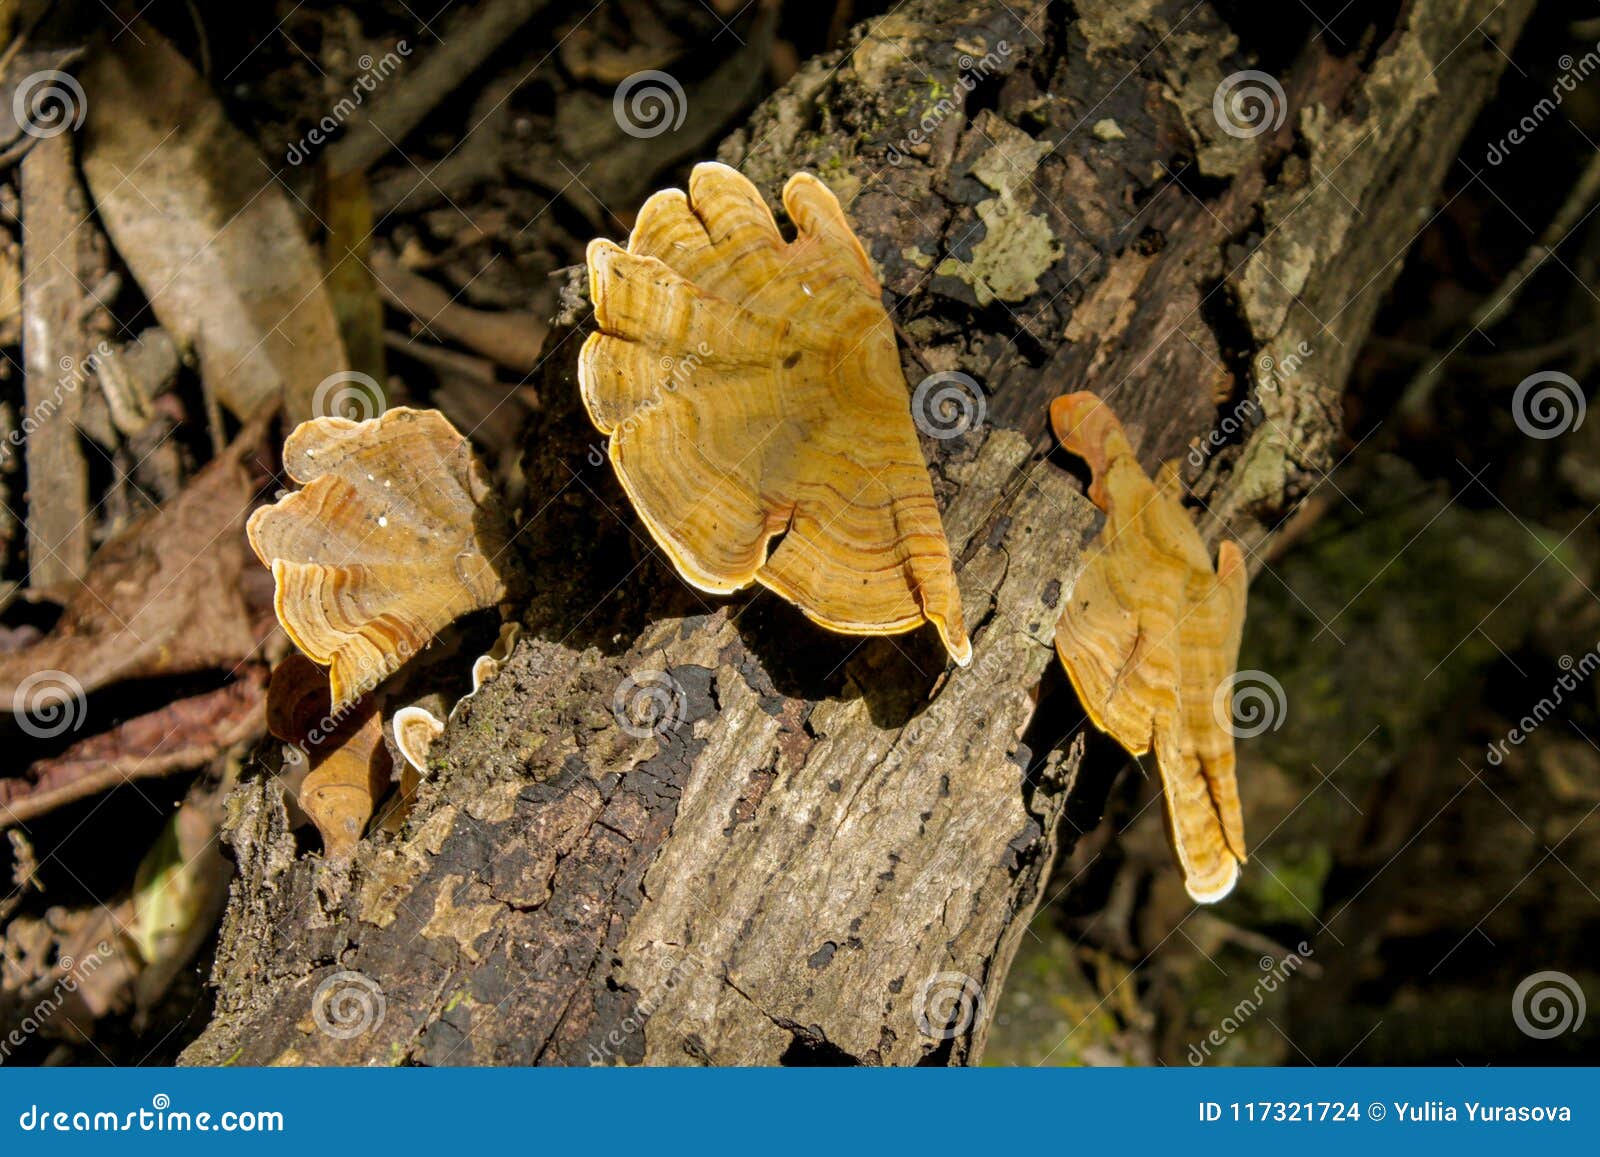 jungle forest tree with mushrooms